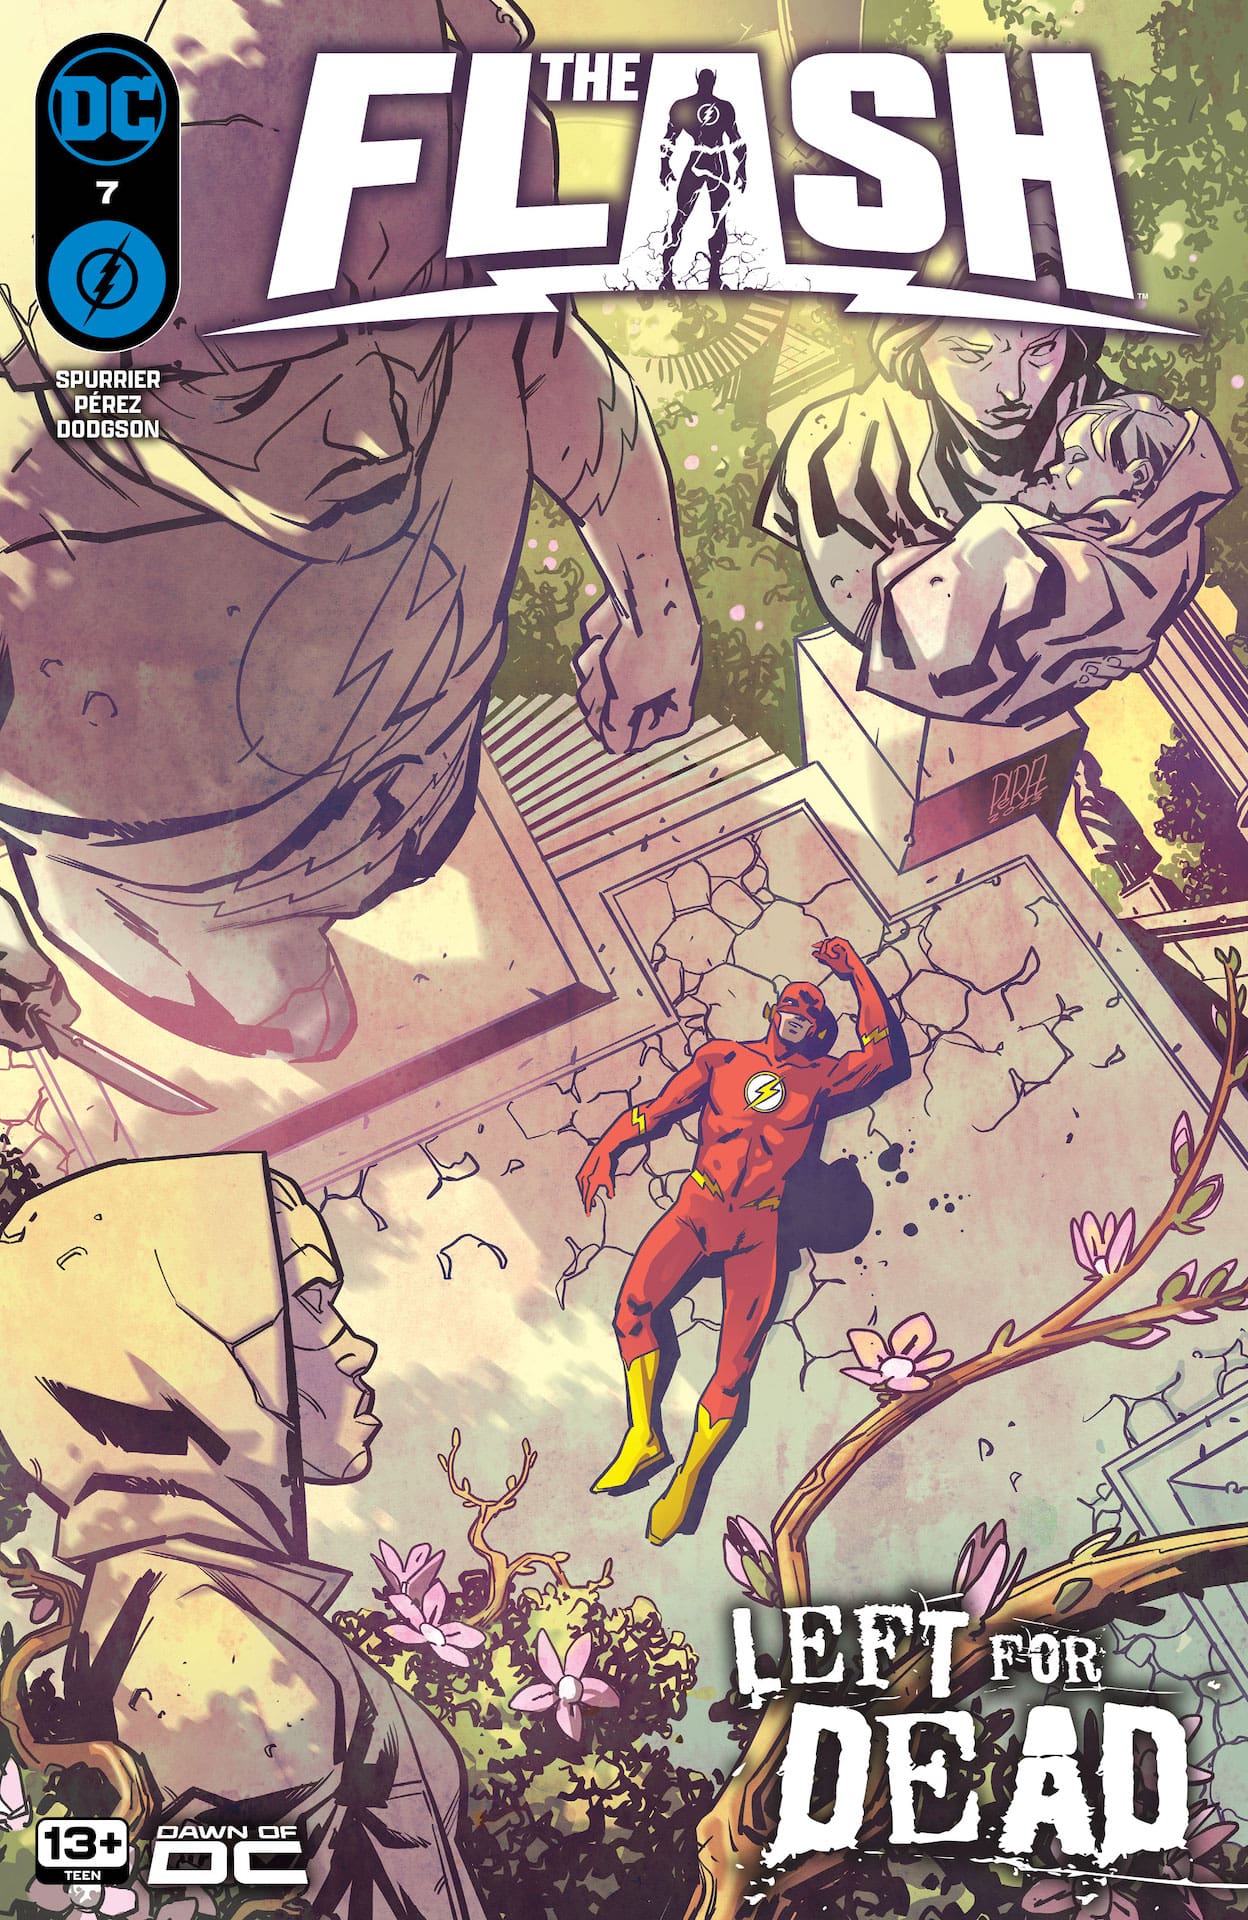 DC Preview: The Flash #7